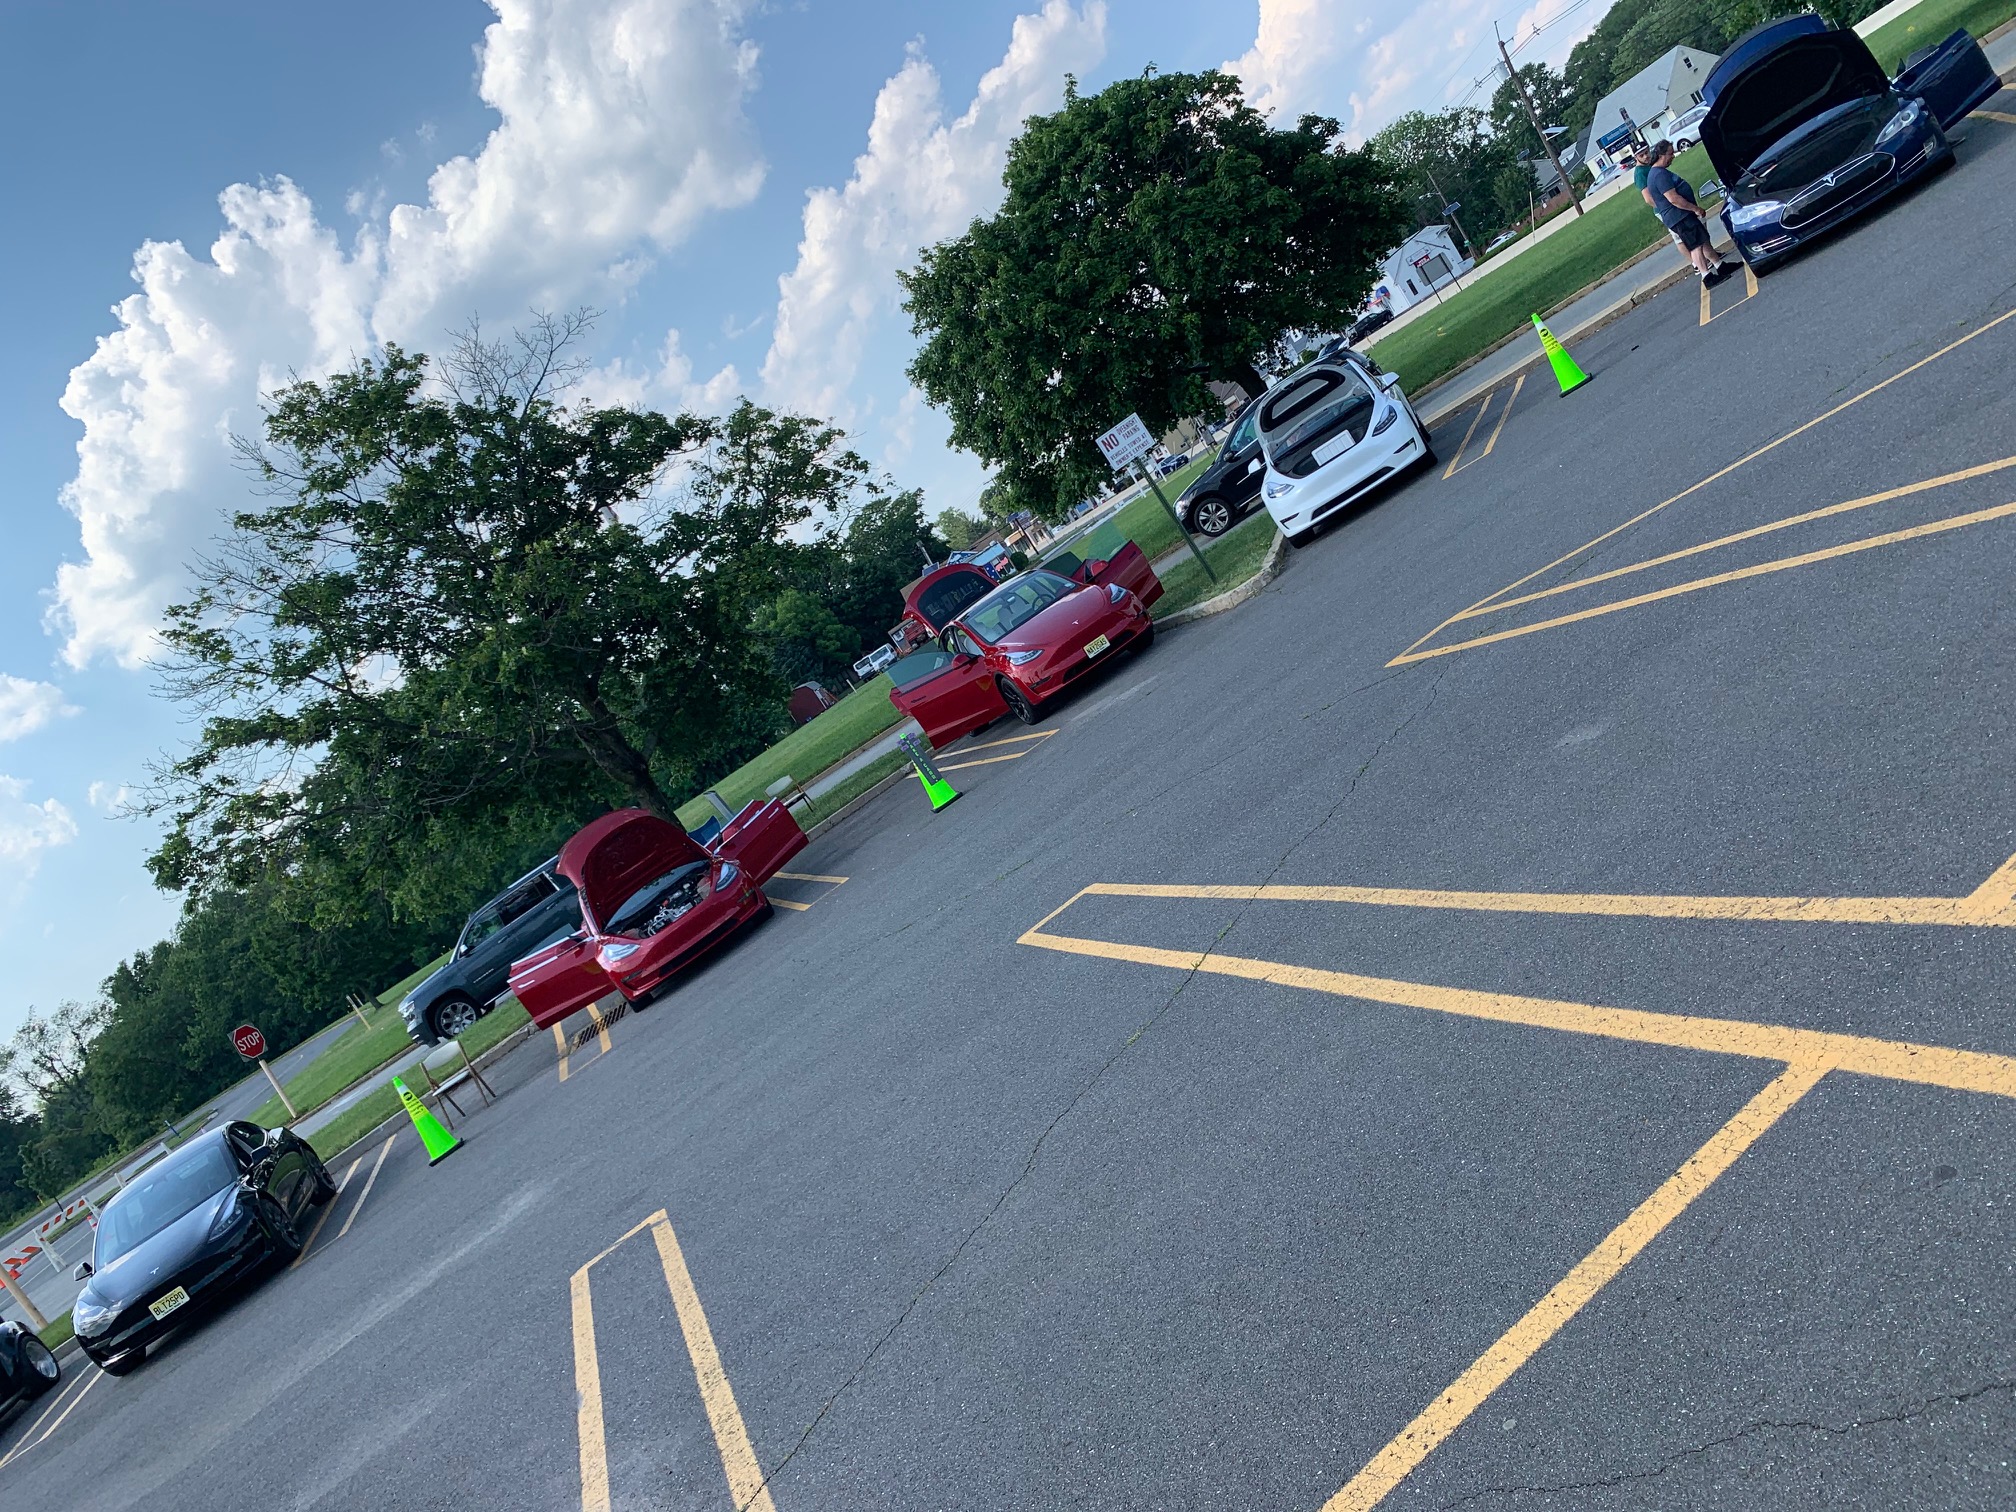 No fooling around, we had 6 Tesla's, The Charge Up NJ Incentive from 2020 gave out $5000 to 6914 Electric Vehicles and 84% of them were Tesla's,  So, There are a lot of Tesla's around!